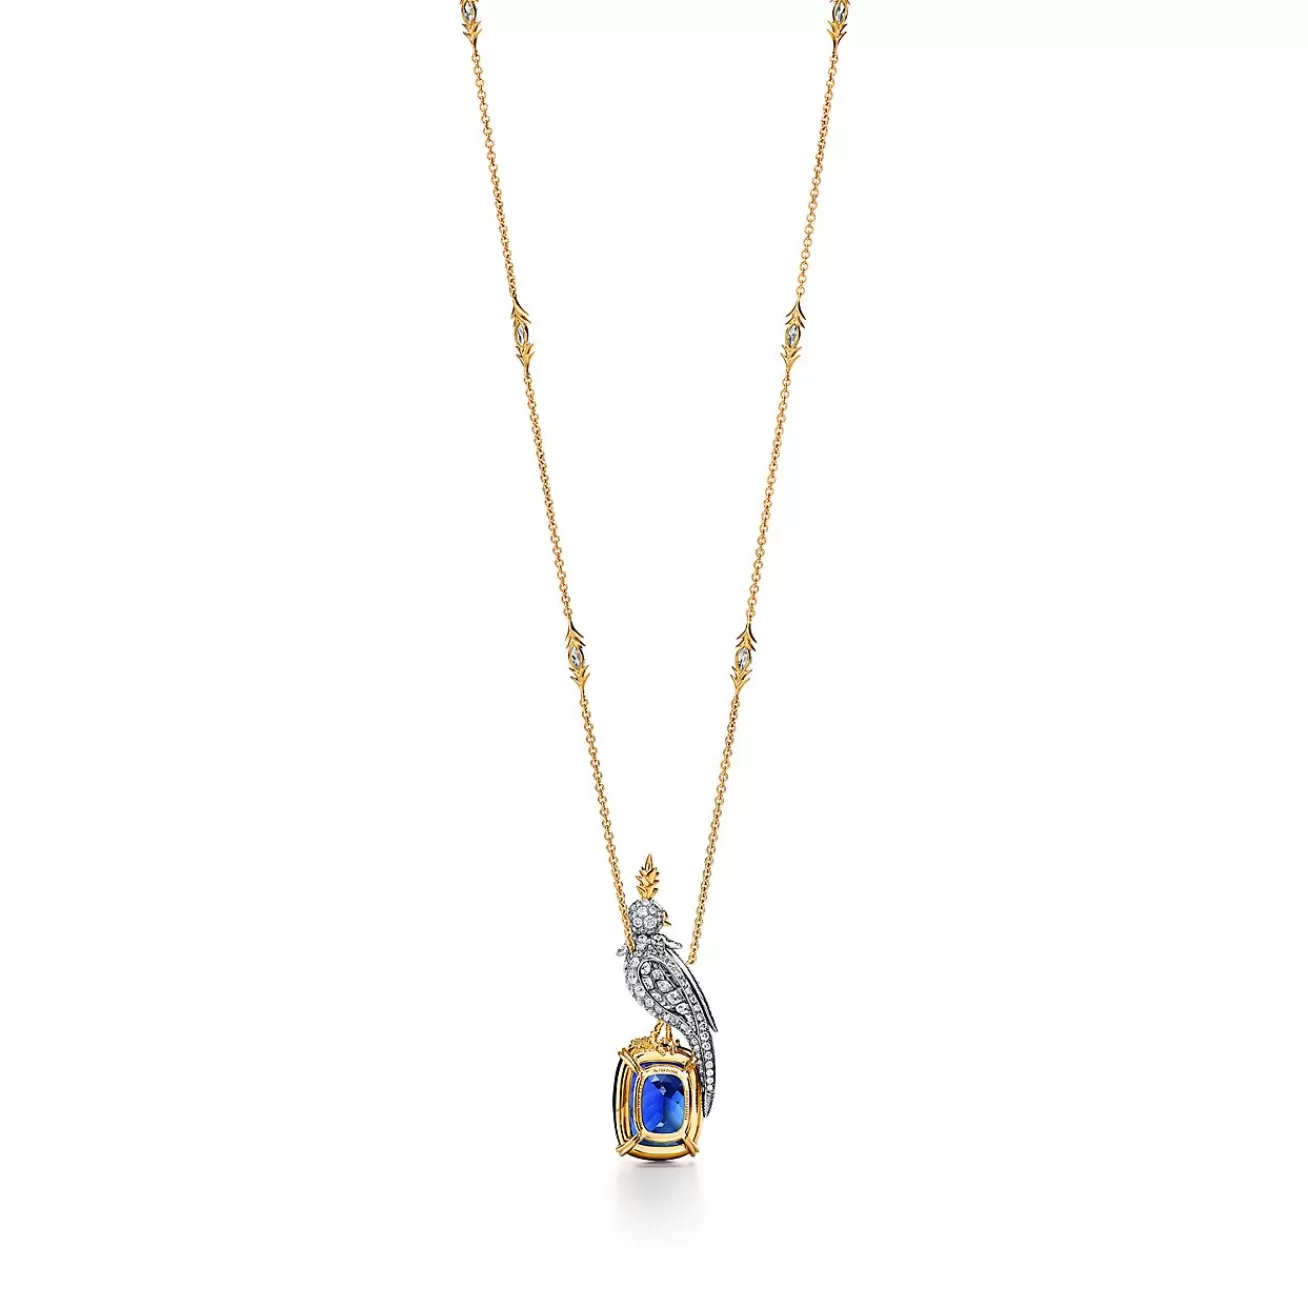 Tiffany & Co. Pendant in Gold and Platinum with a Tanzanite, Diamonds and Pink Sapphires | ^ Necklaces & Pendants | Gold Jewelry